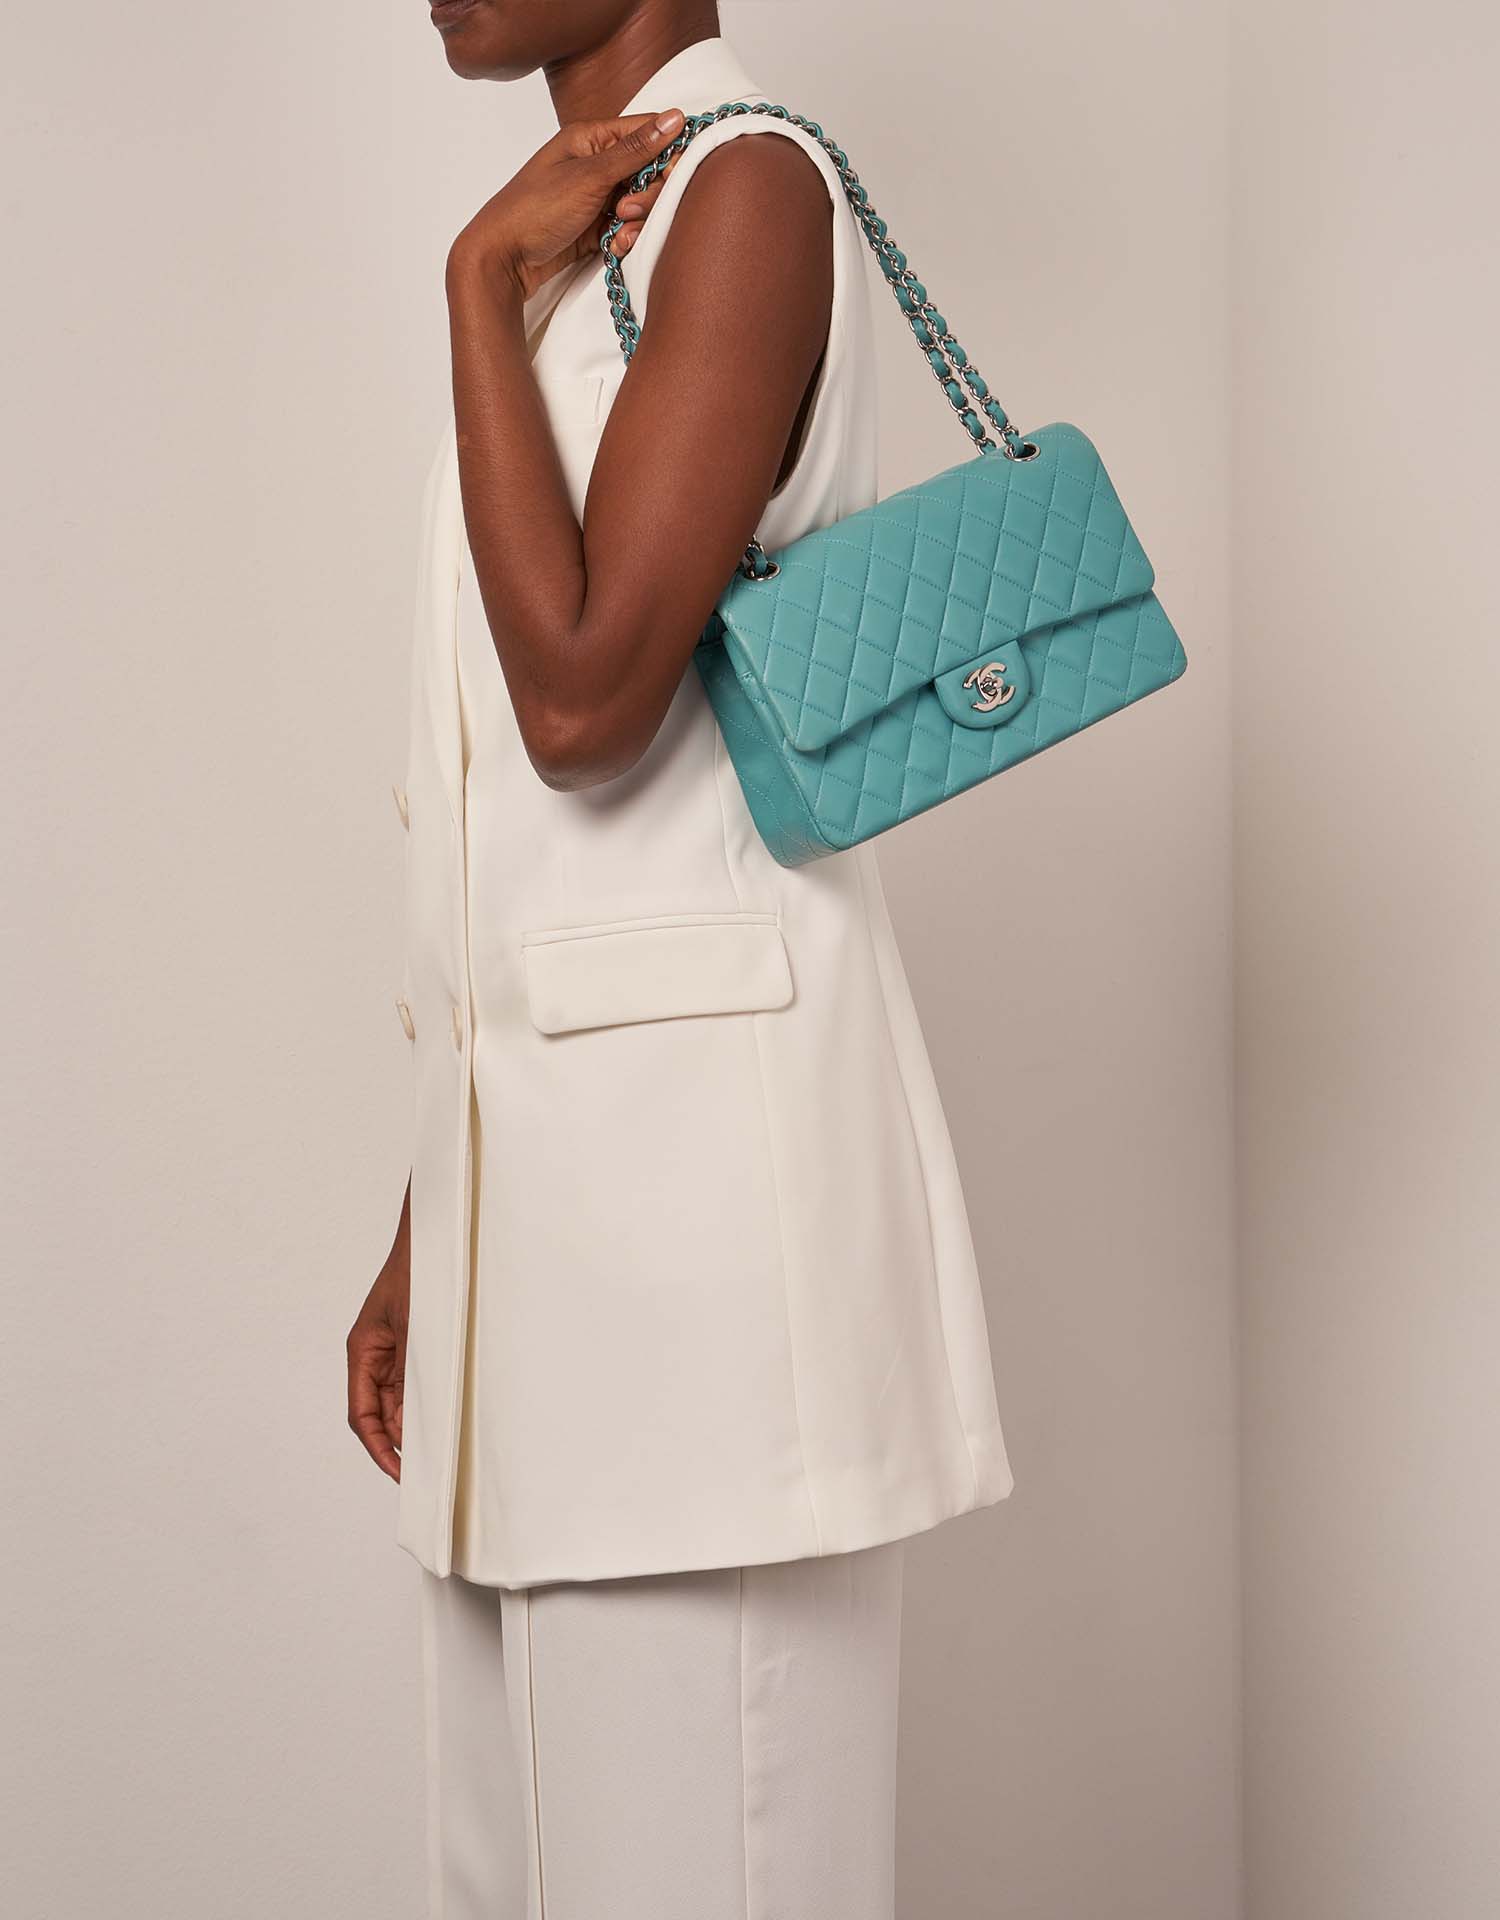 Chanel Timeless Medium Turquoise Sizes Worn | Sell your designer bag on Saclab.com